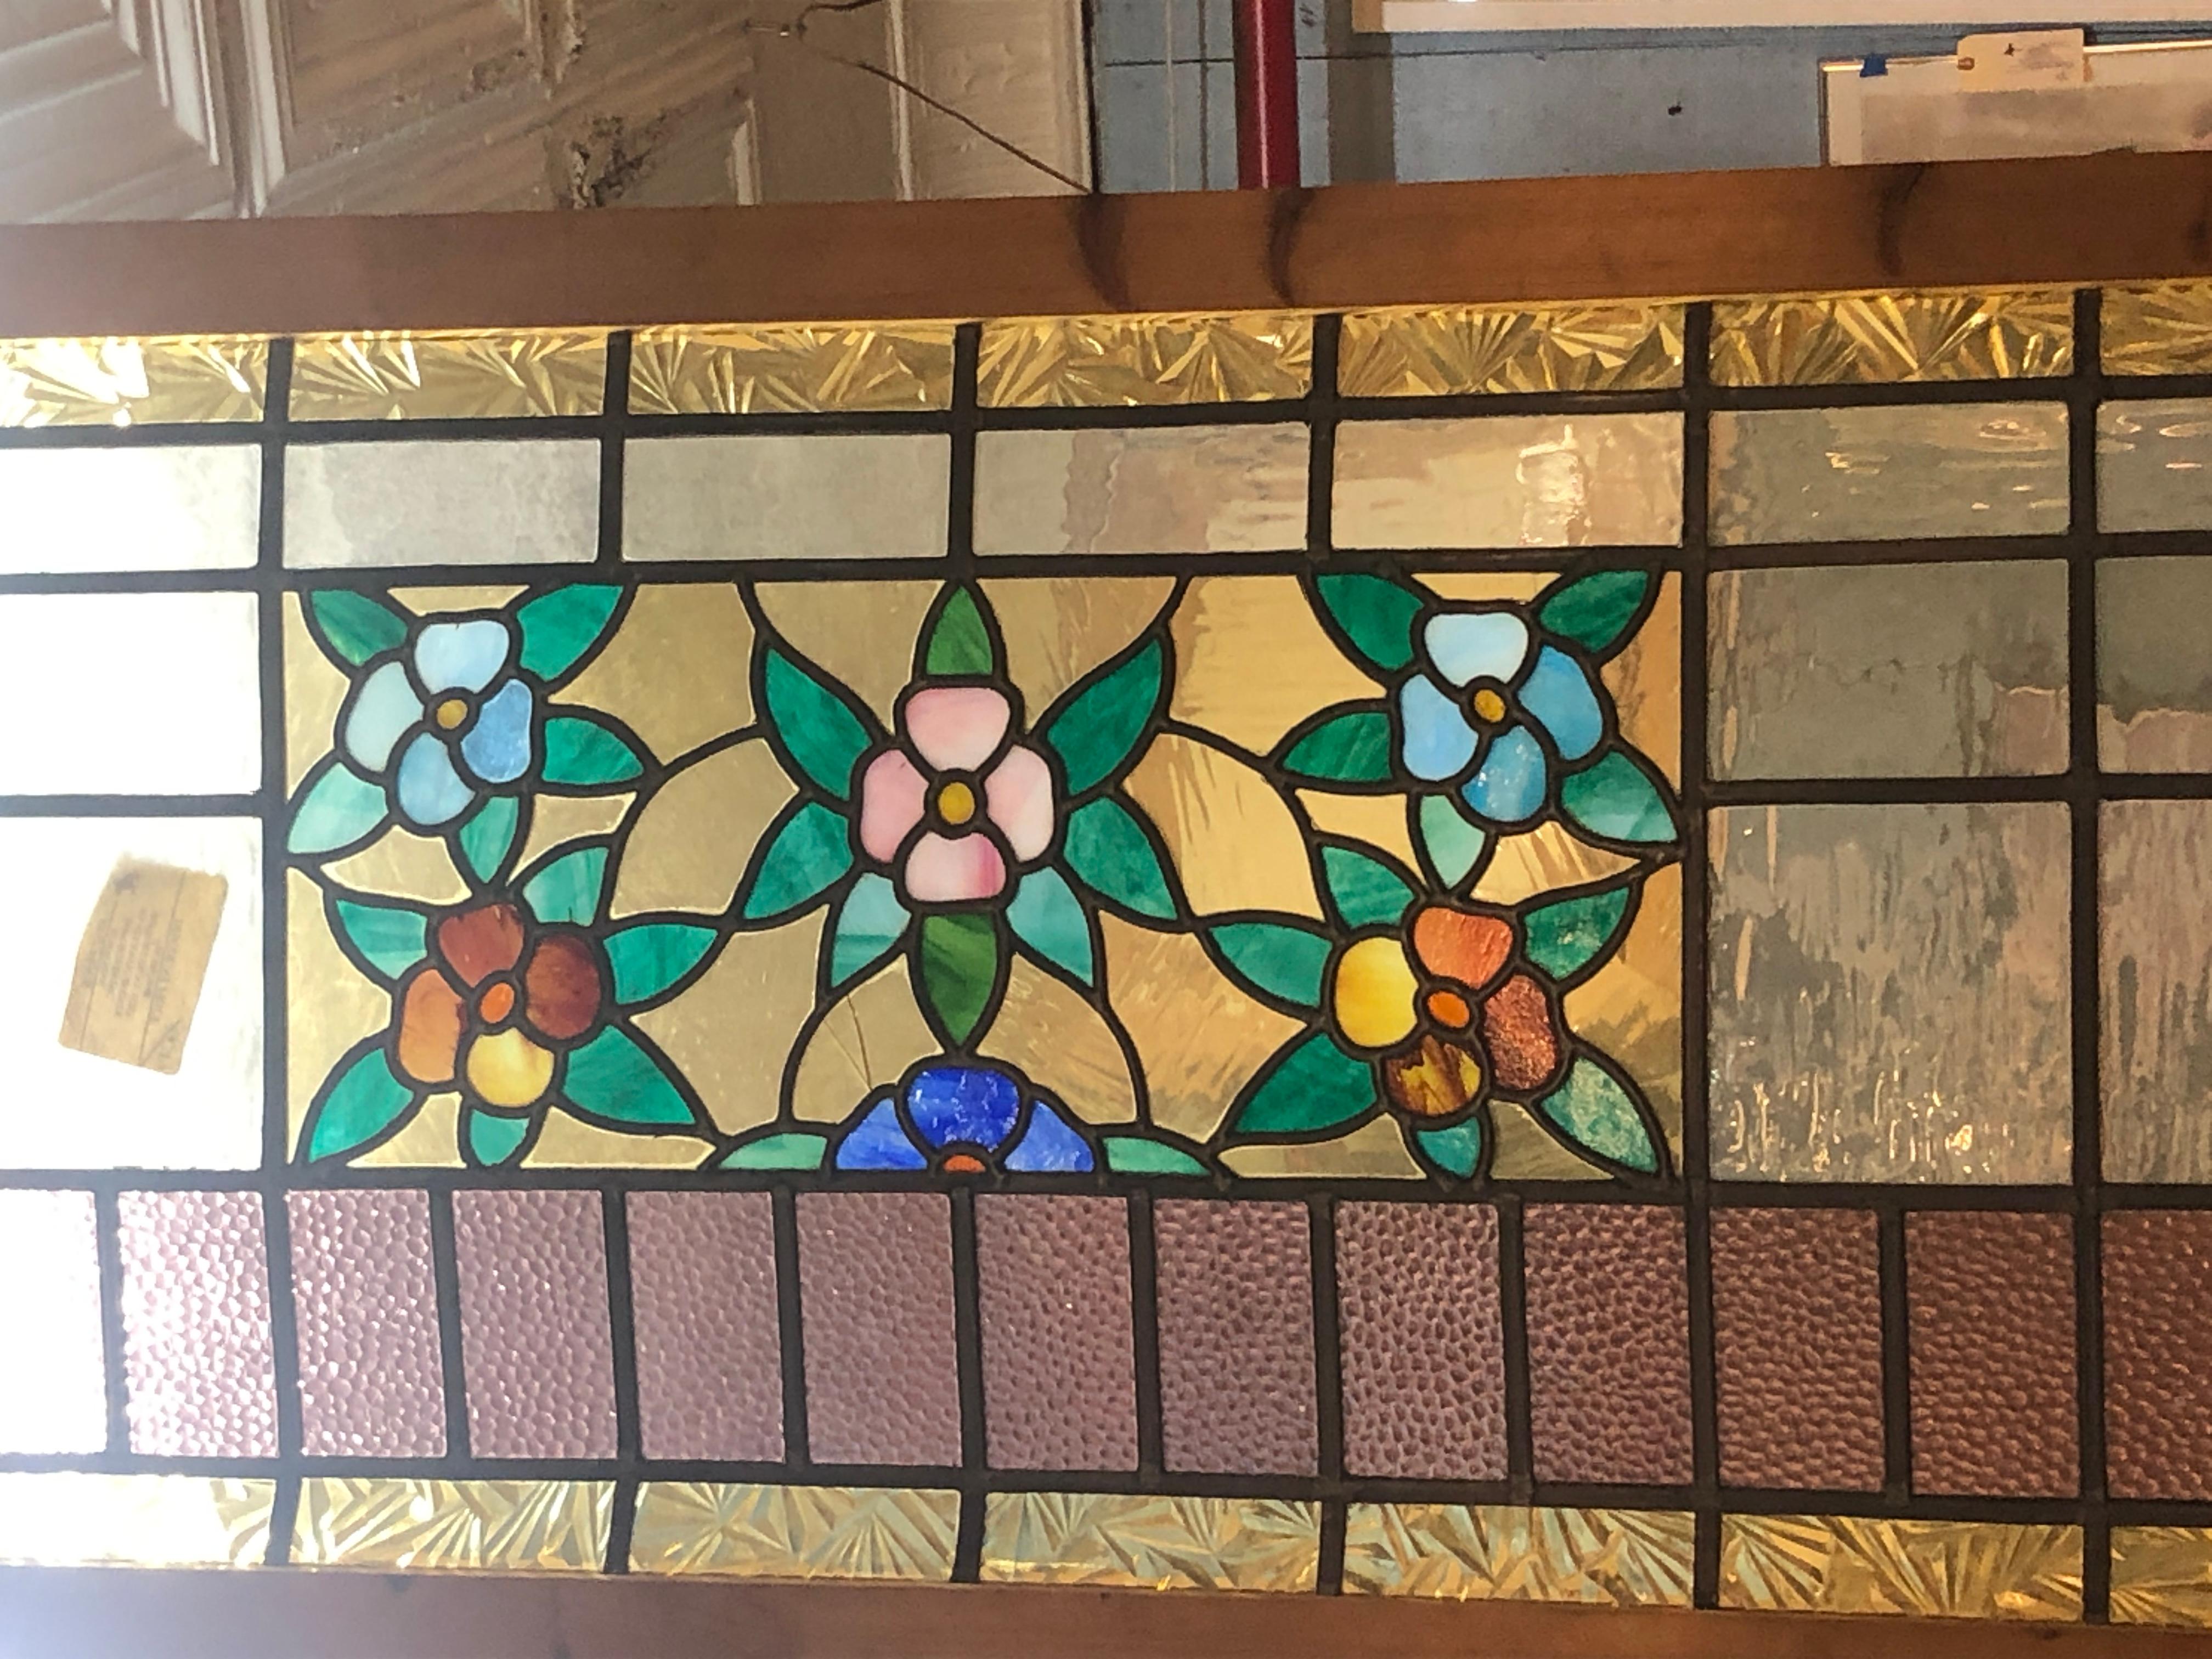 Turn of the century American made stained glass transom with wonderful floral design.
Currently housed in a temporary wooden frame - the overall dimensions are for the stained glass and the frame.
Located in NY